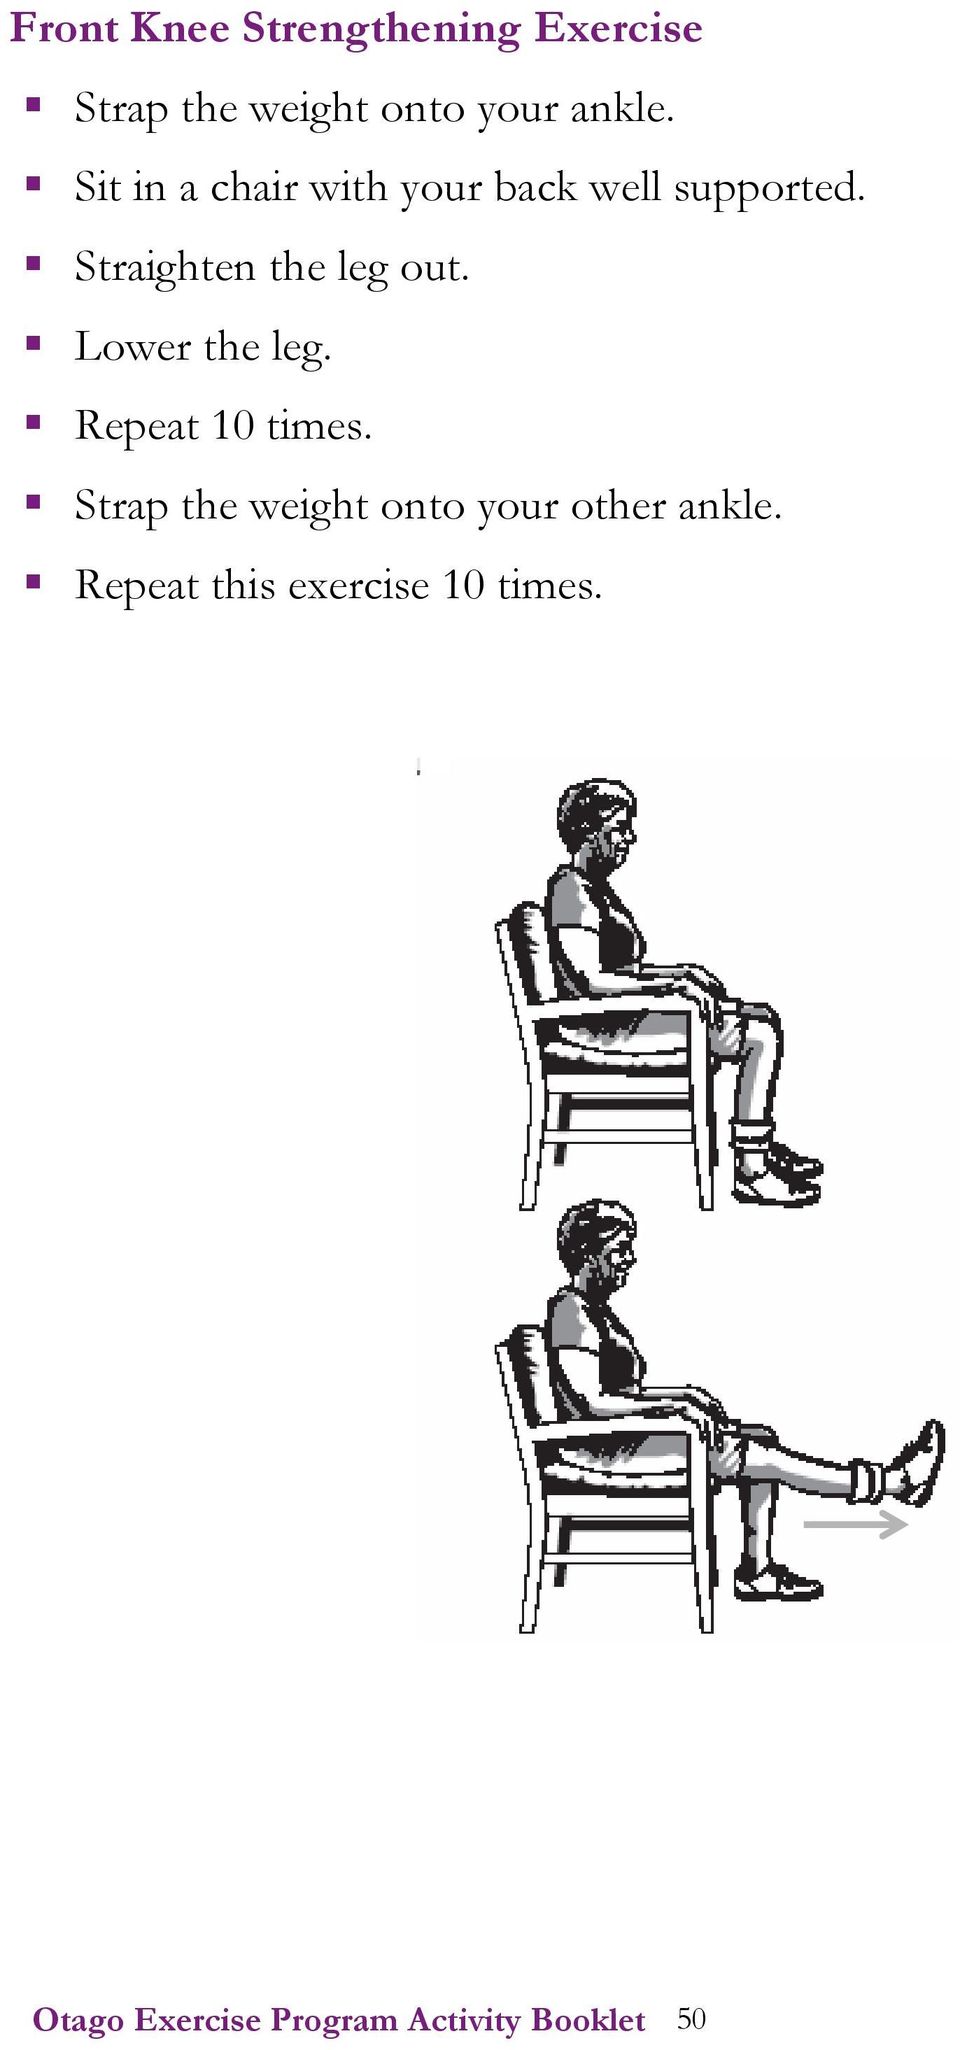 Straighten the leg out. Lower the leg. Repeat 10 times.